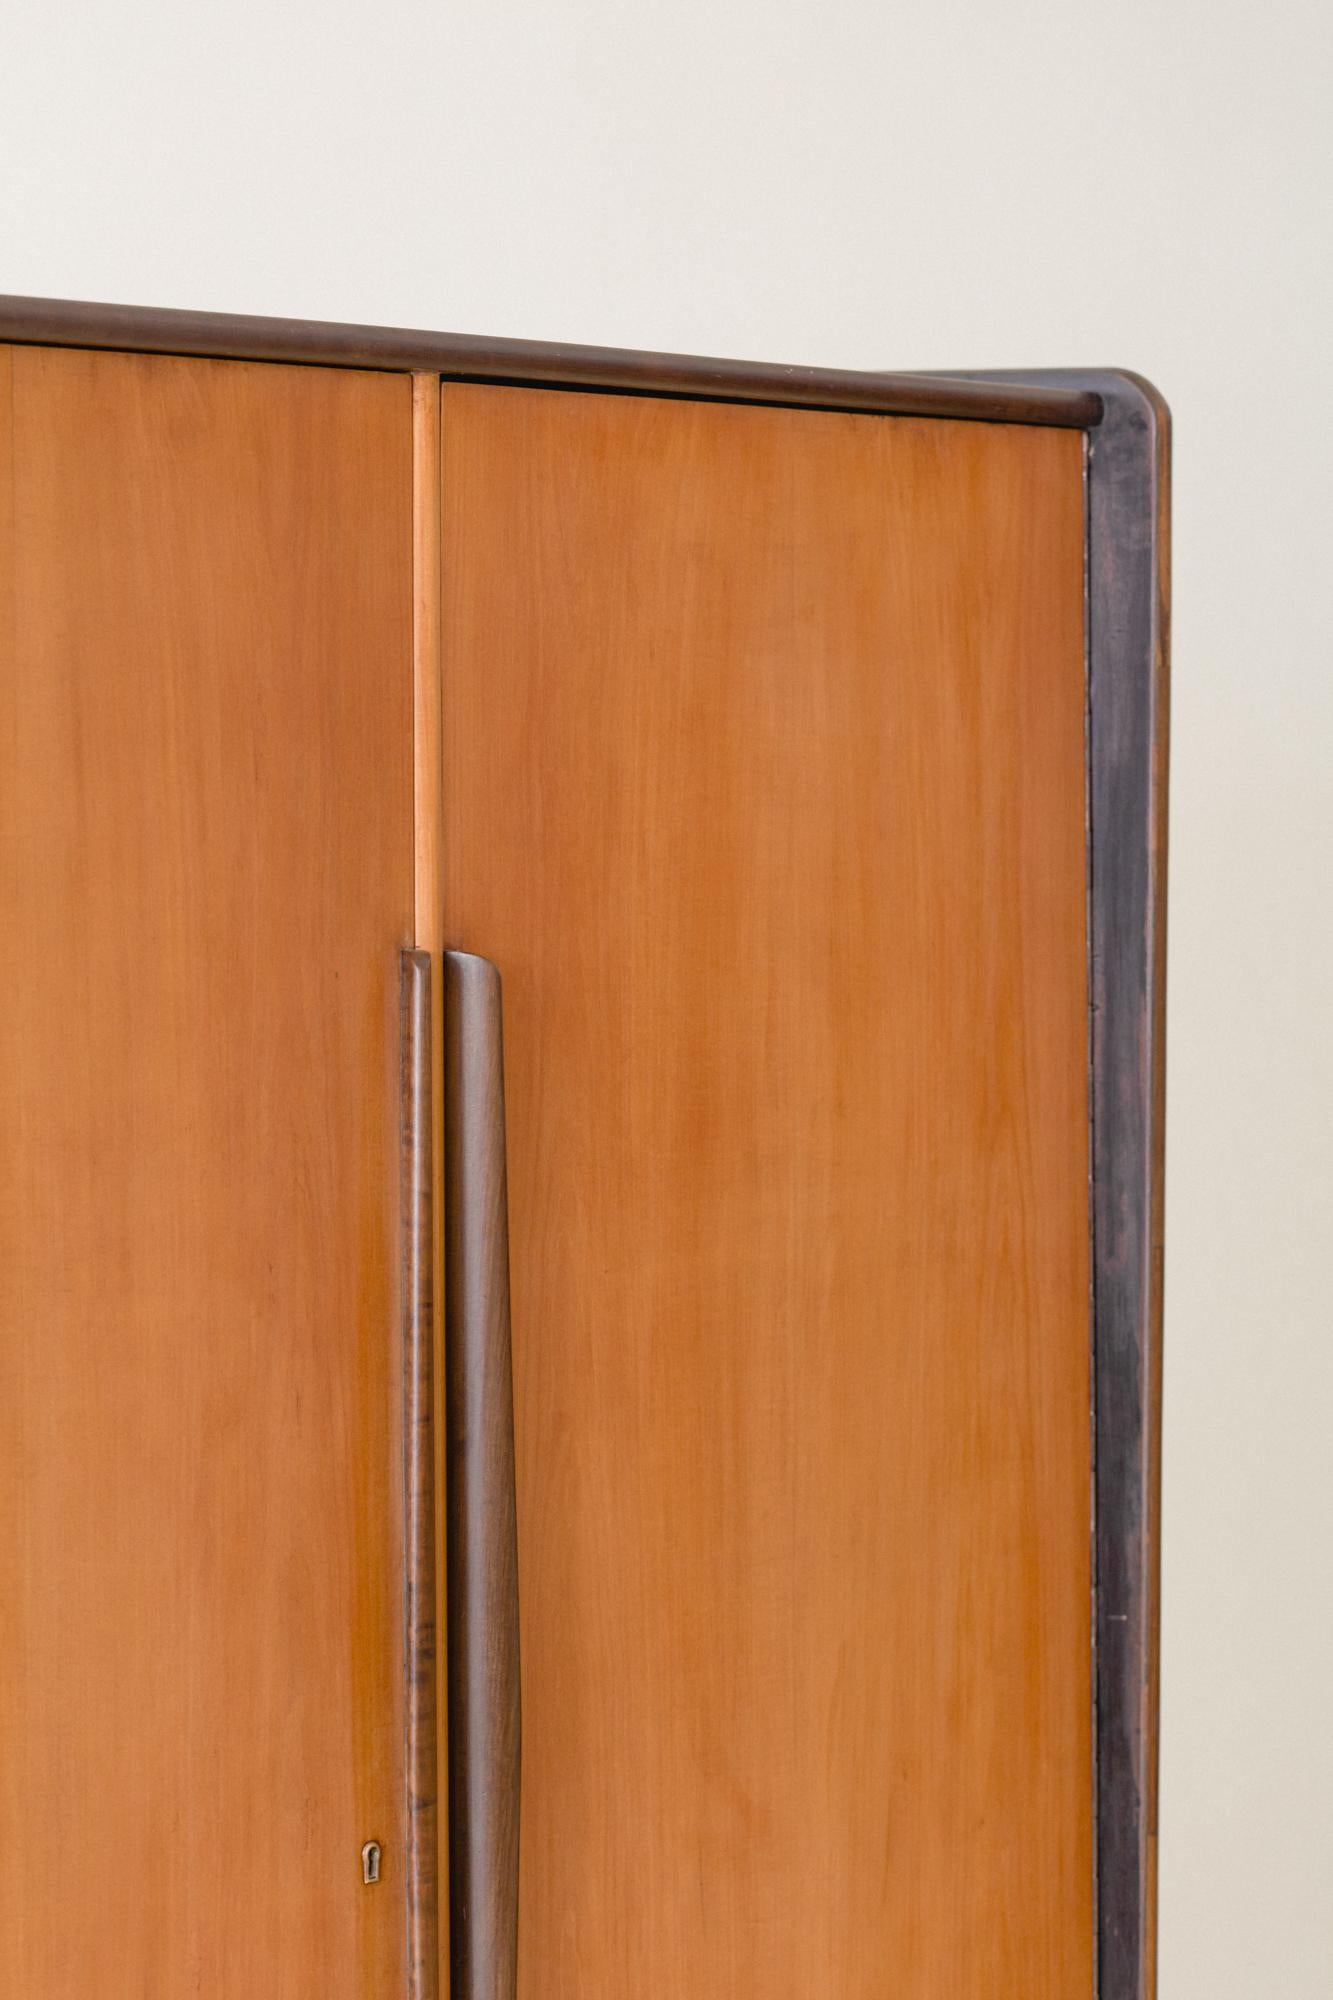 Other Vintage Caviuna and Imbuia Wardrobe by Móveis Cimo, 1960s, Brazilian Midcentury For Sale